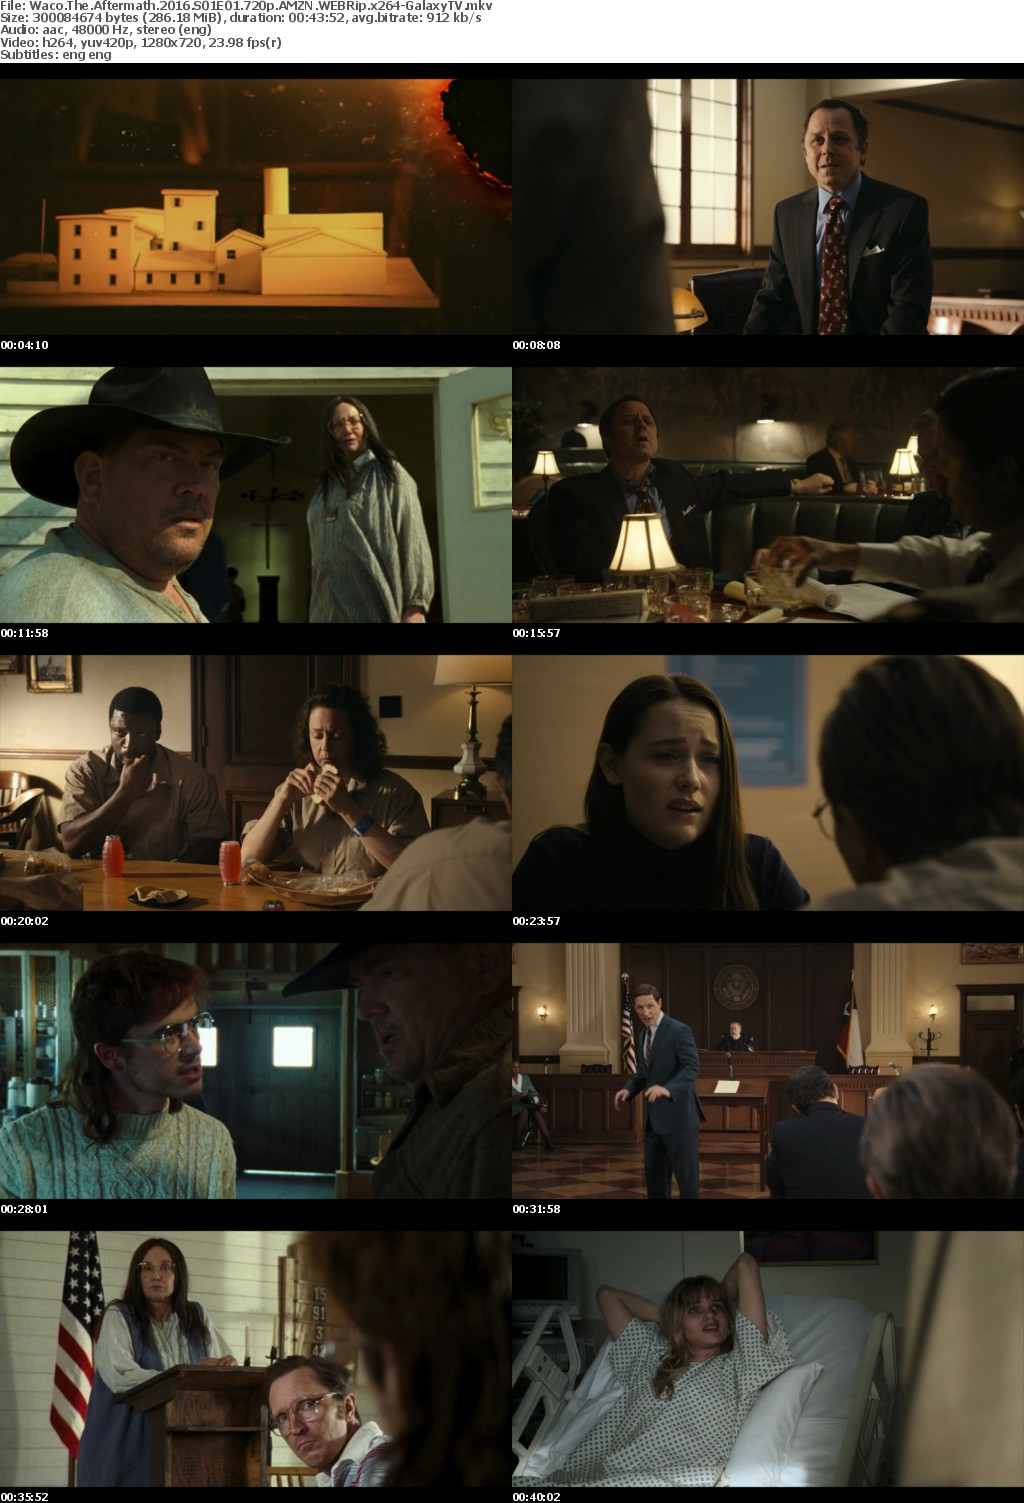 Waco The Aftermath S01 COMPLETE 720p AMZN WEBRip x264-GalaxyTV